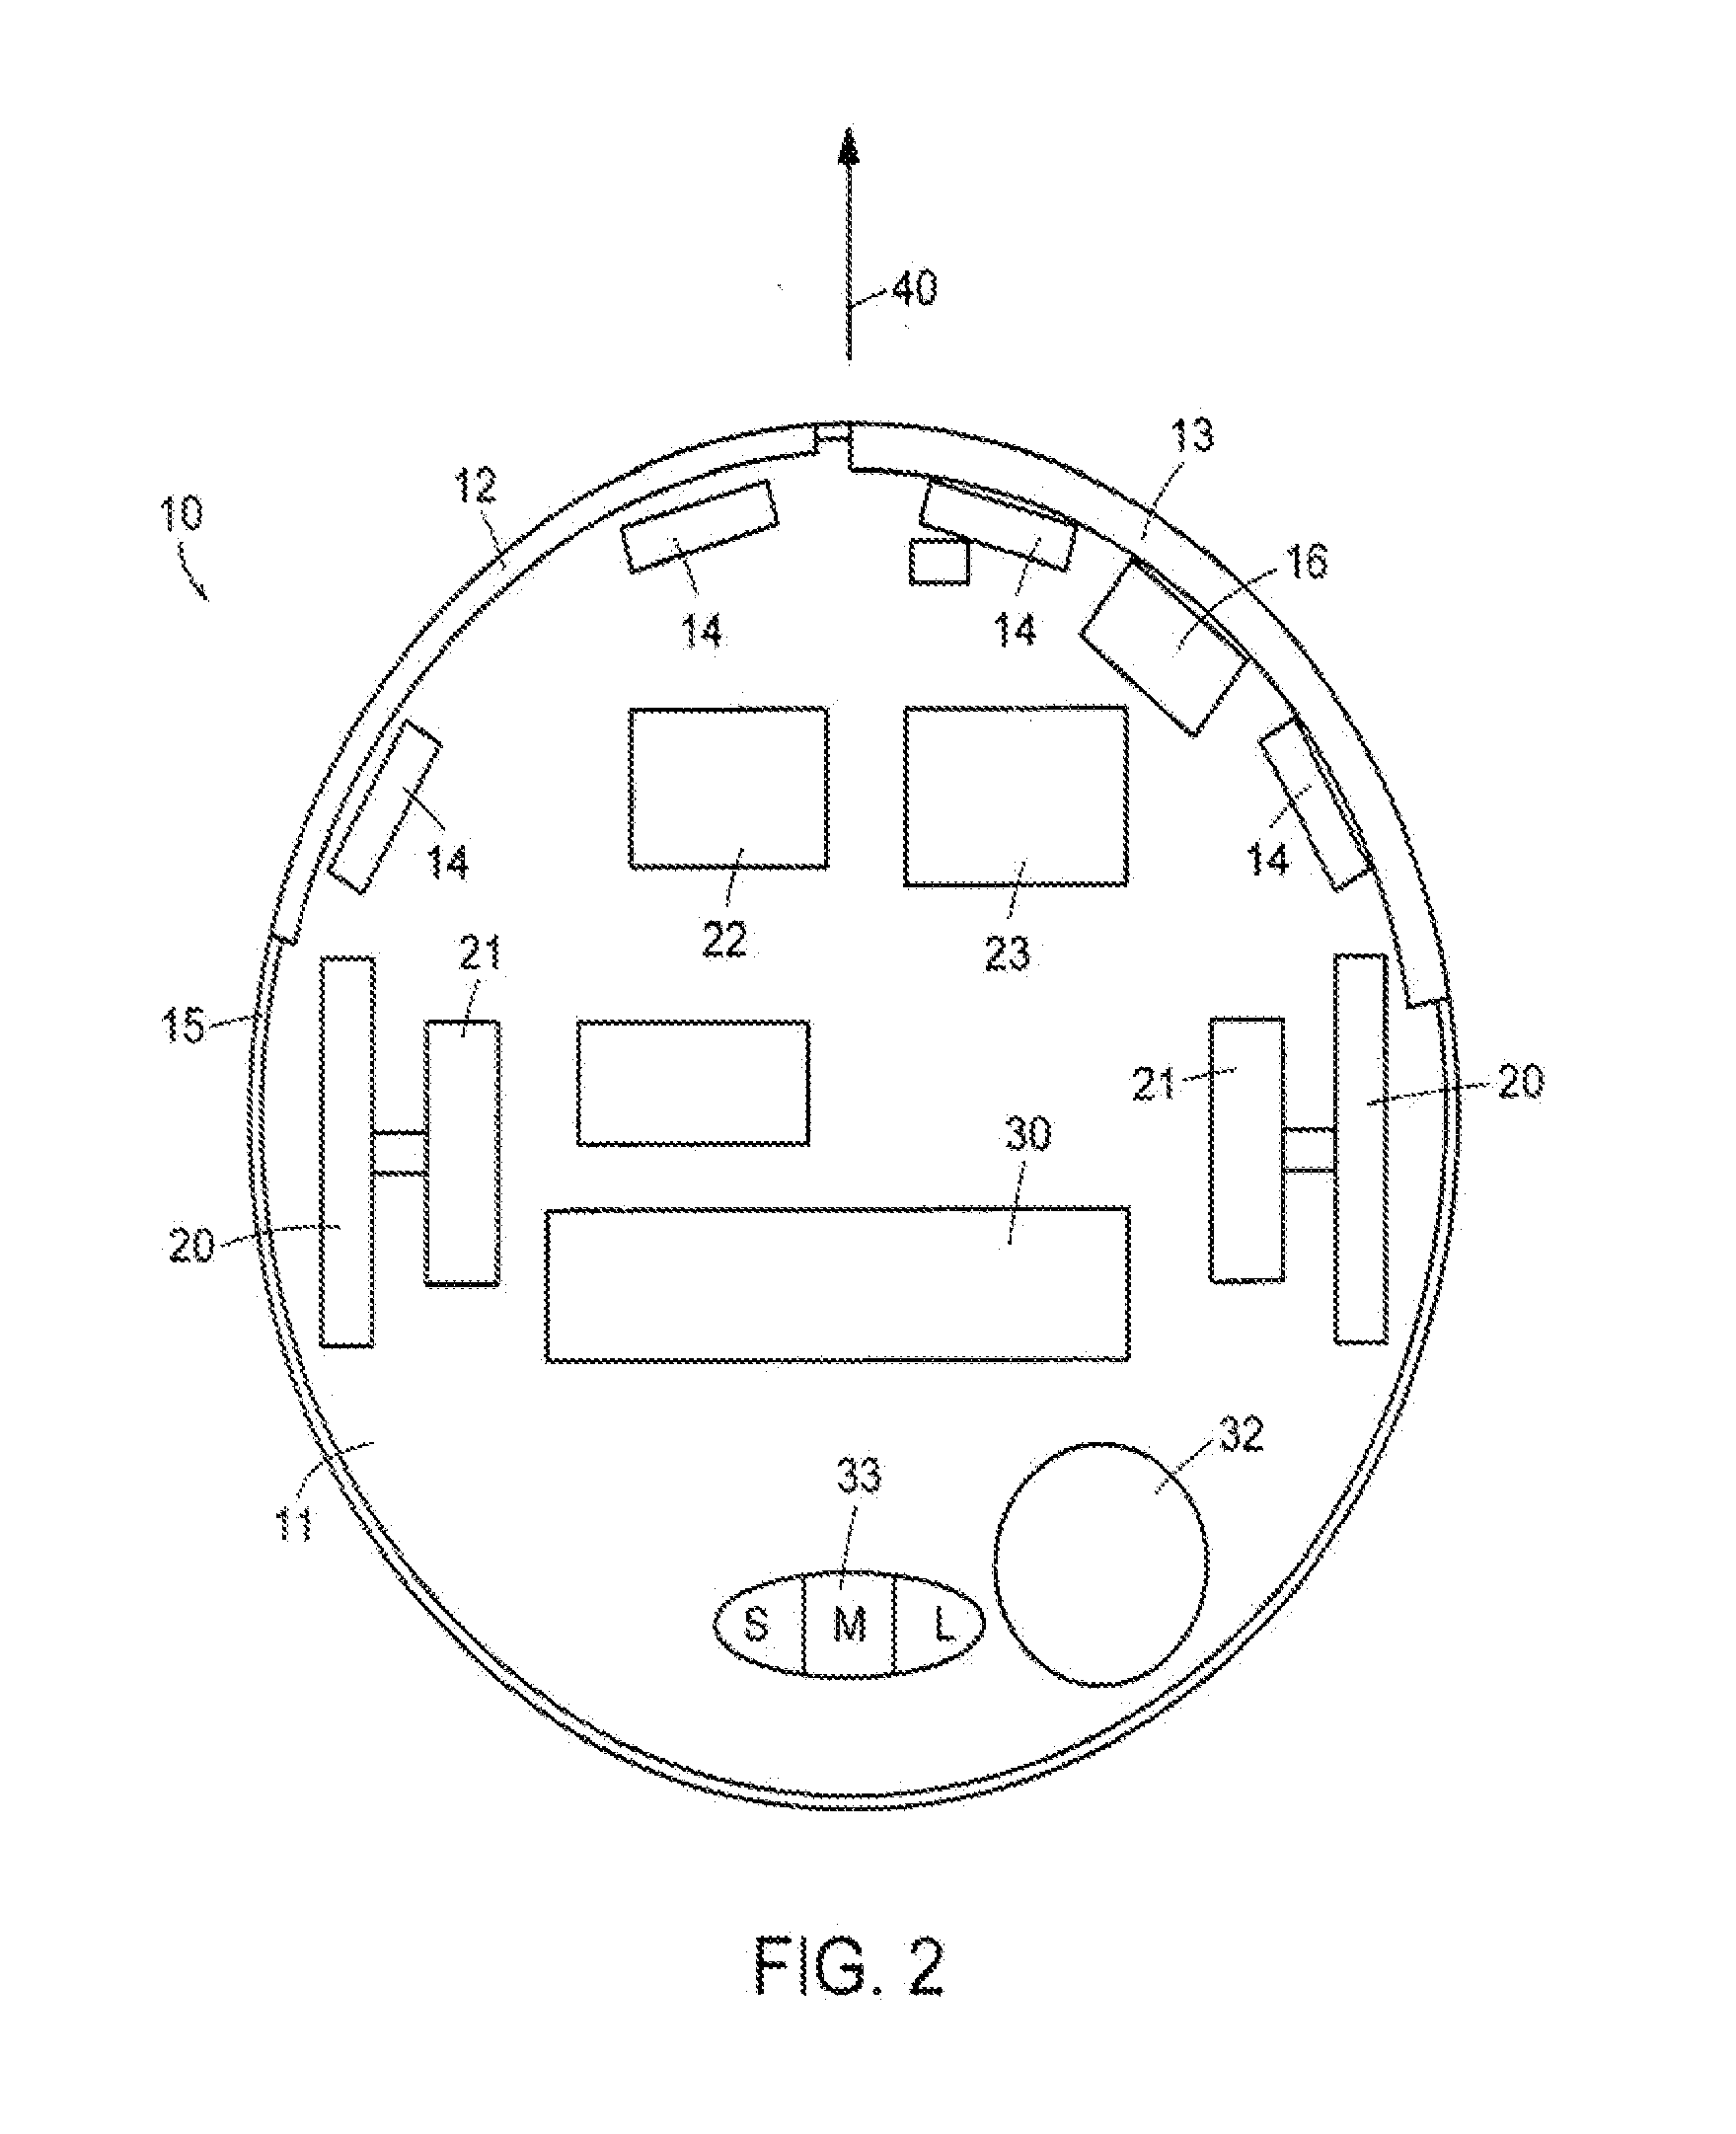 Method and System for Multi-Mode Coverage For An Autonomous Robot